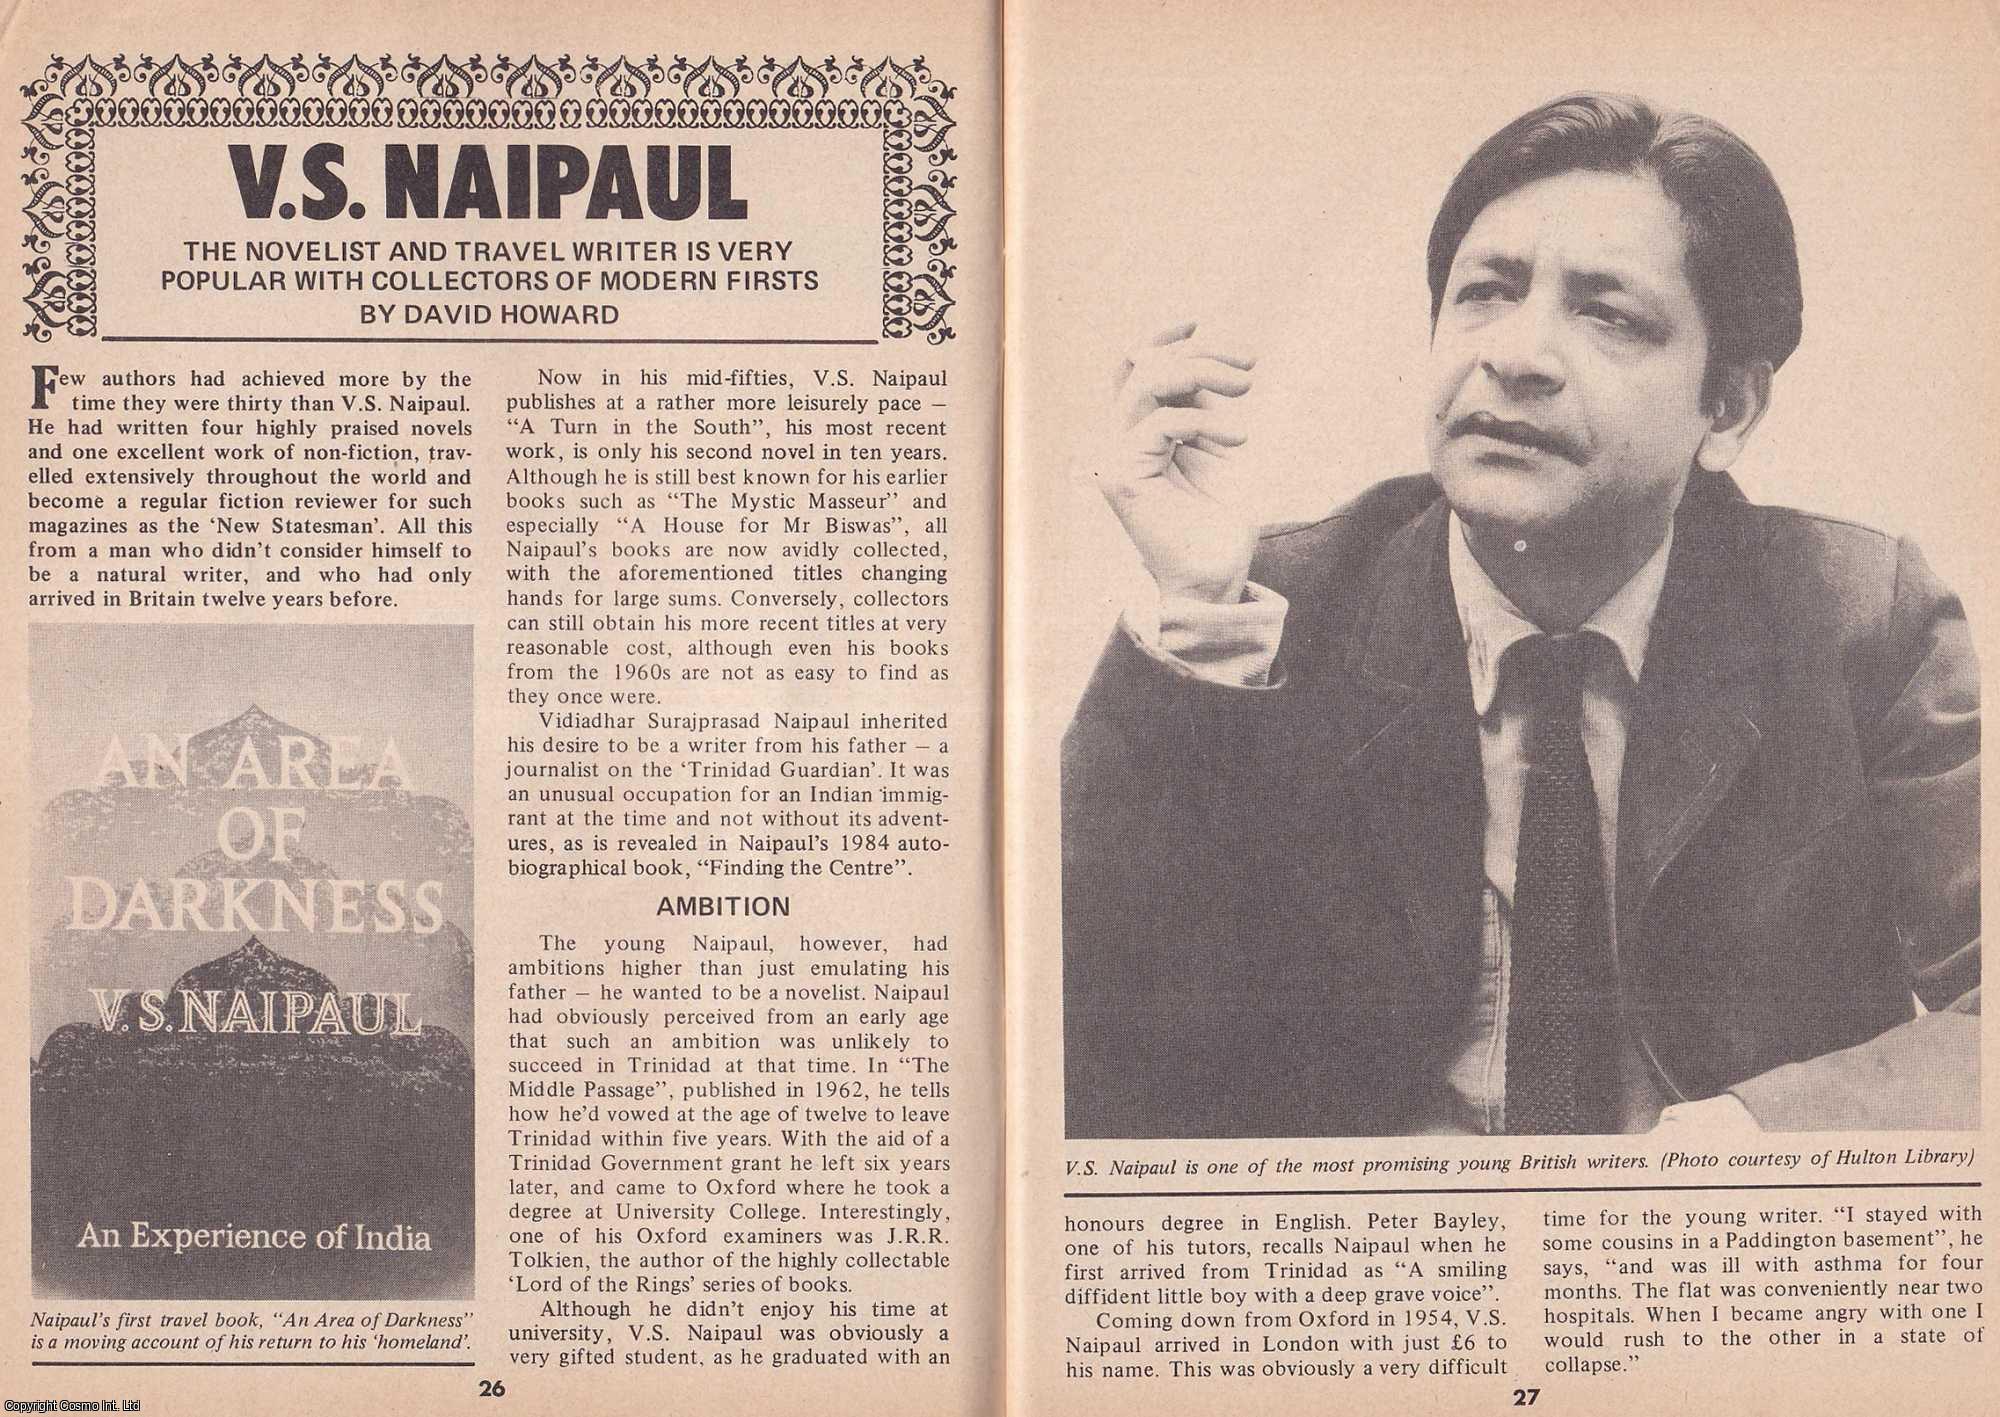 David Howard - V. S. Naipaul. The Novelist and Travel Writer. This is an original article separated from an issue of The Book & Magazine Collector publication.